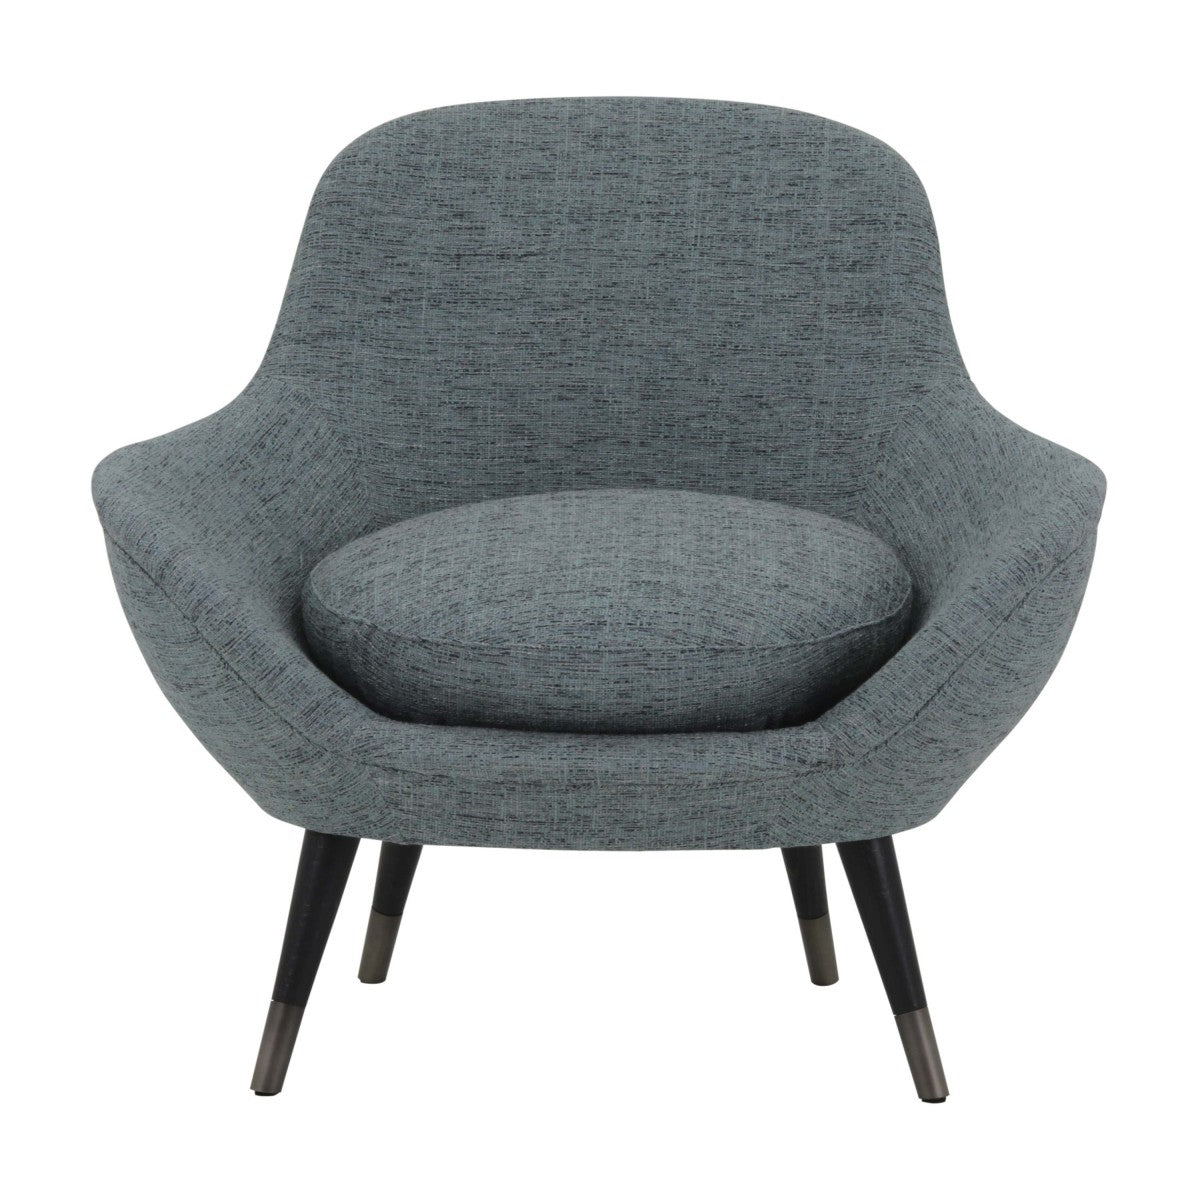 Club Bespoke Upholstered Comfortable Contemporary Club Armchair MS9633P Custom Made To Order